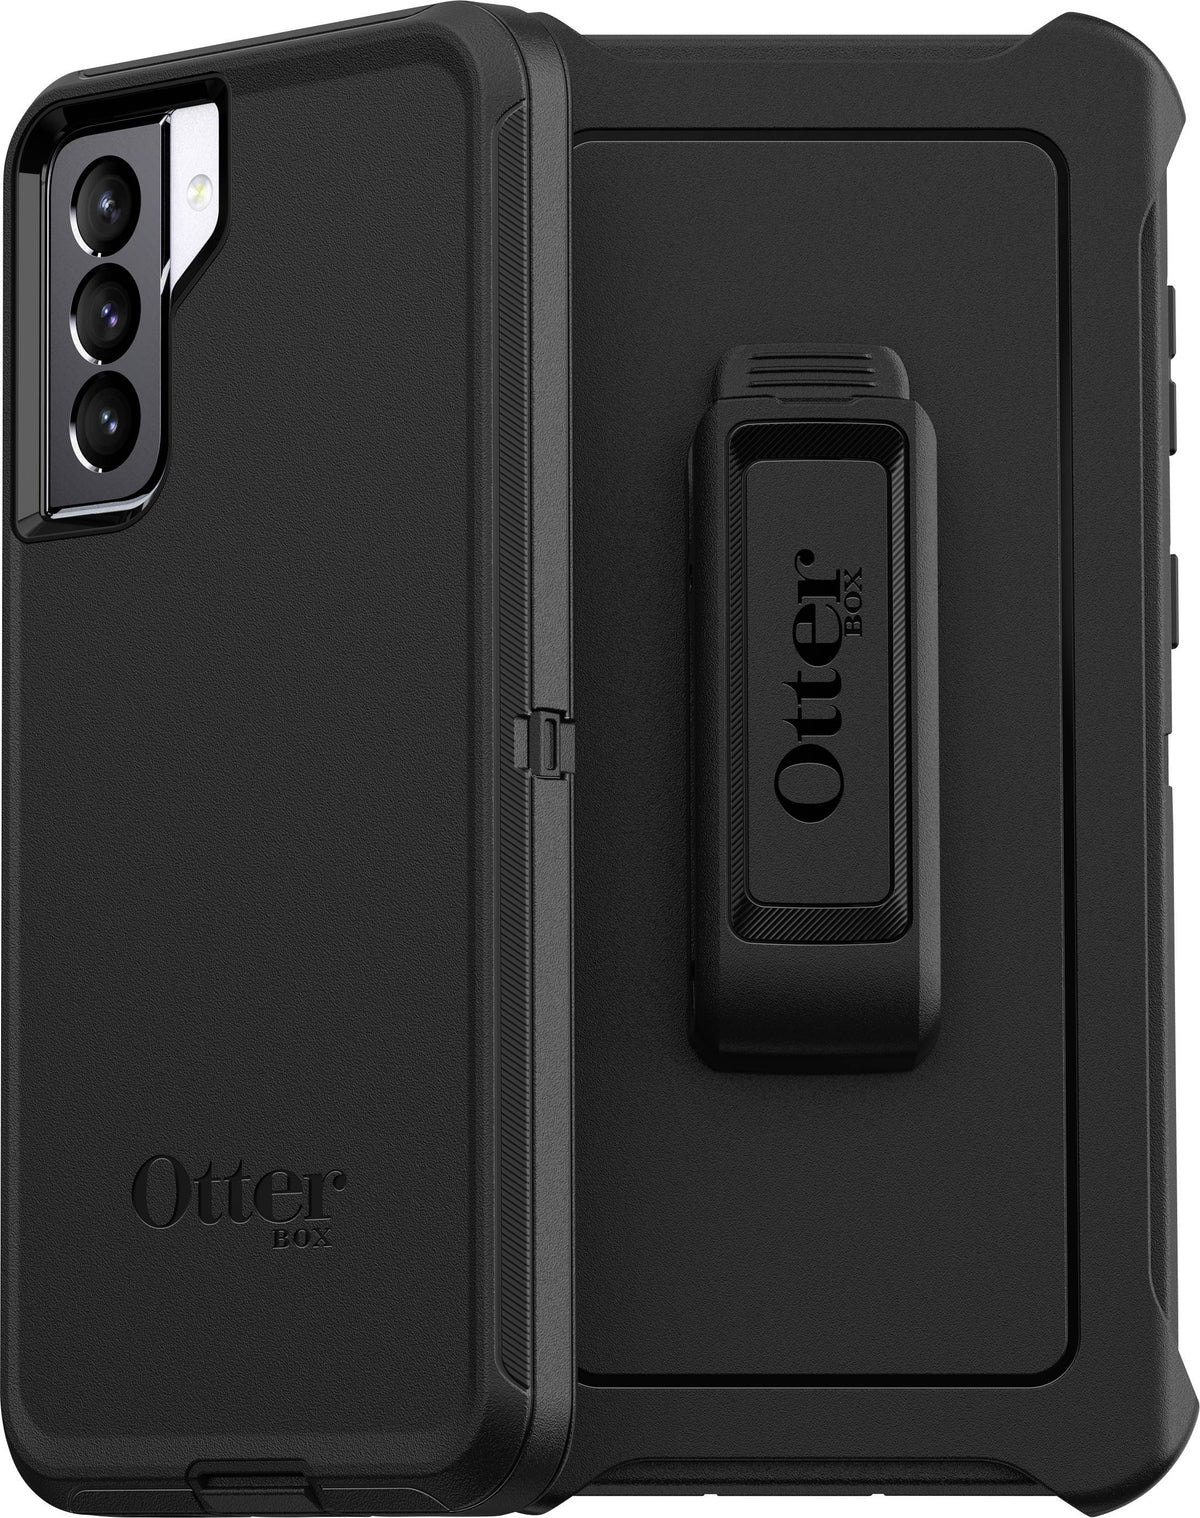 Otterbox Defender Back cover Samsung Galaxy S21+ 5G Black